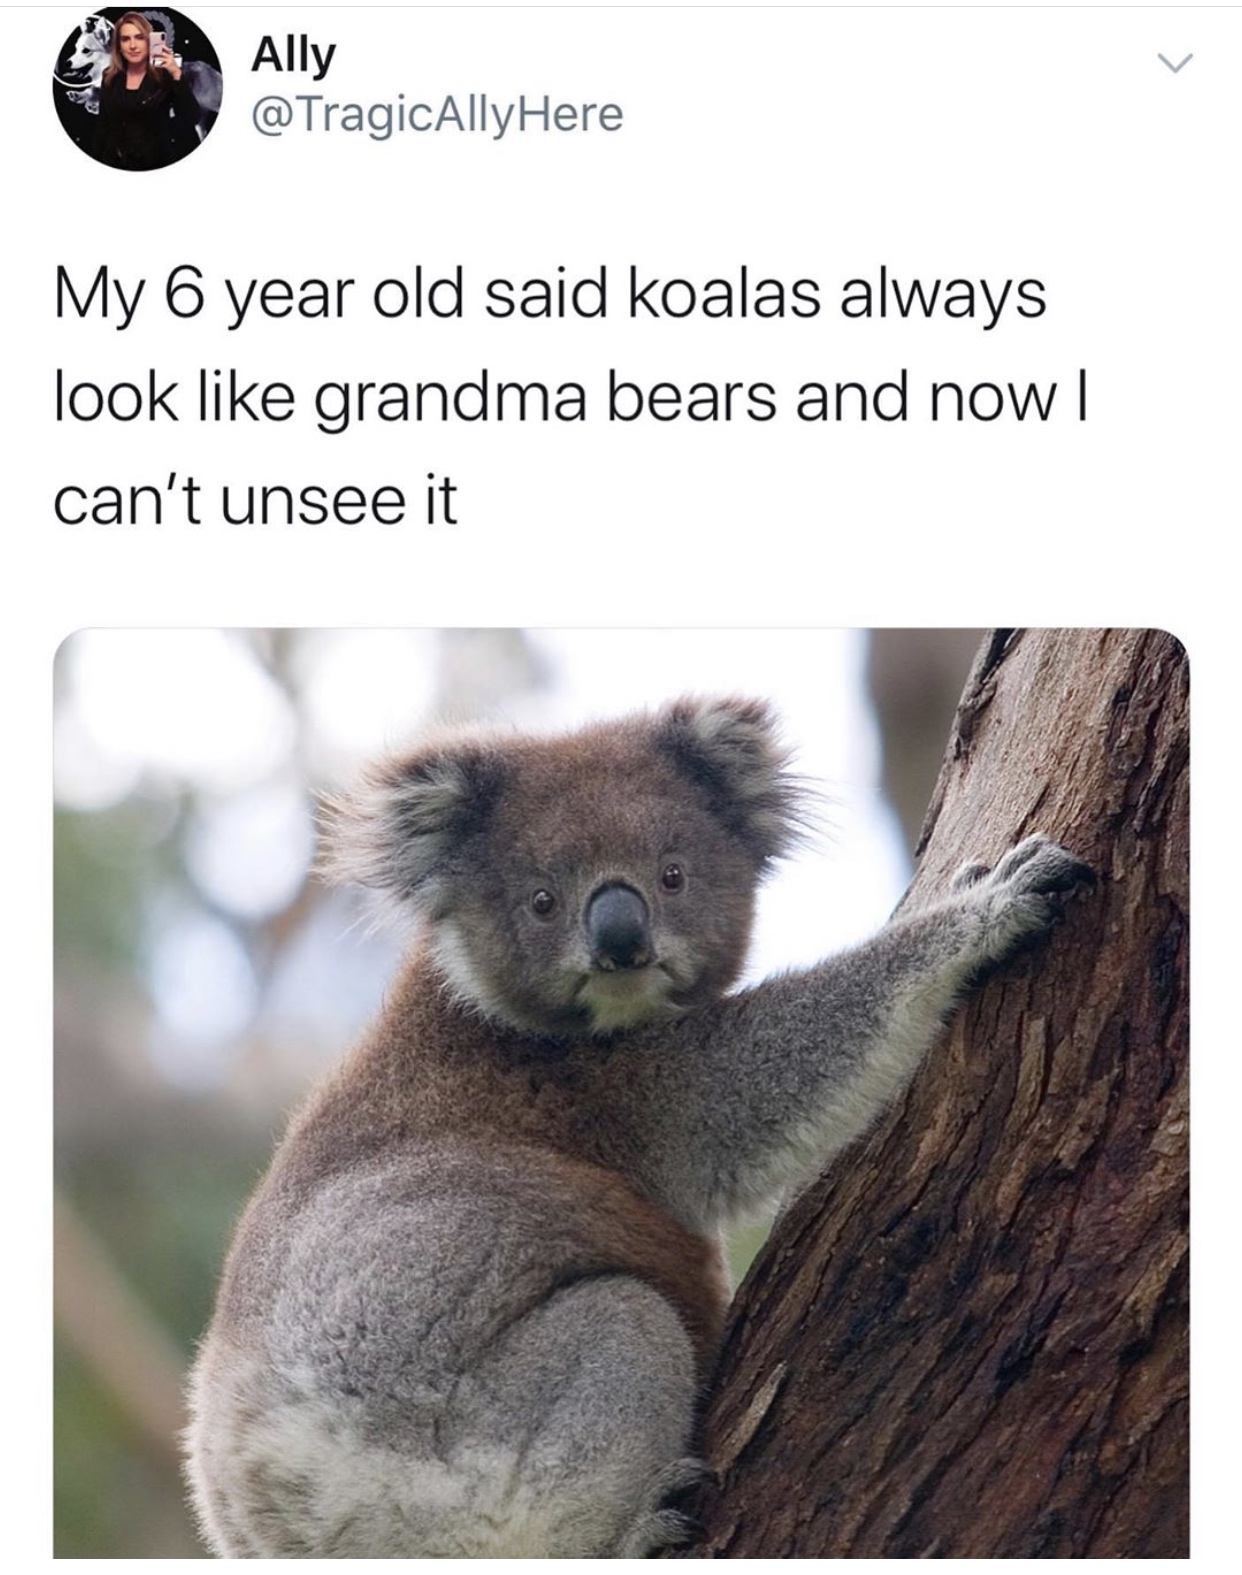 koala bear hugging a tree - Ally Here My 6 year old said koalas always look grandma bears and now ! can't unsee it